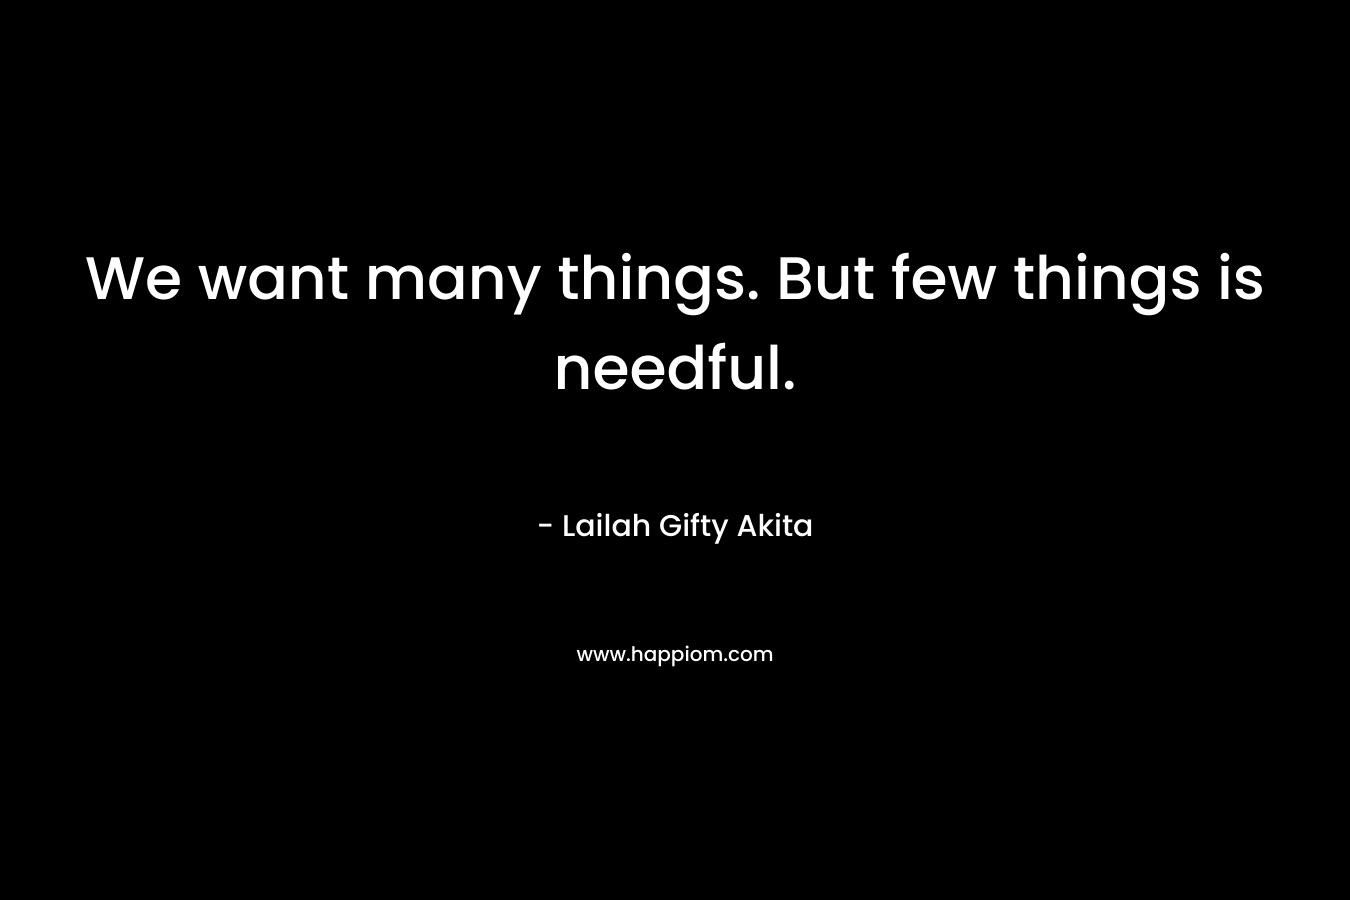 We want many things. But few things is needful.